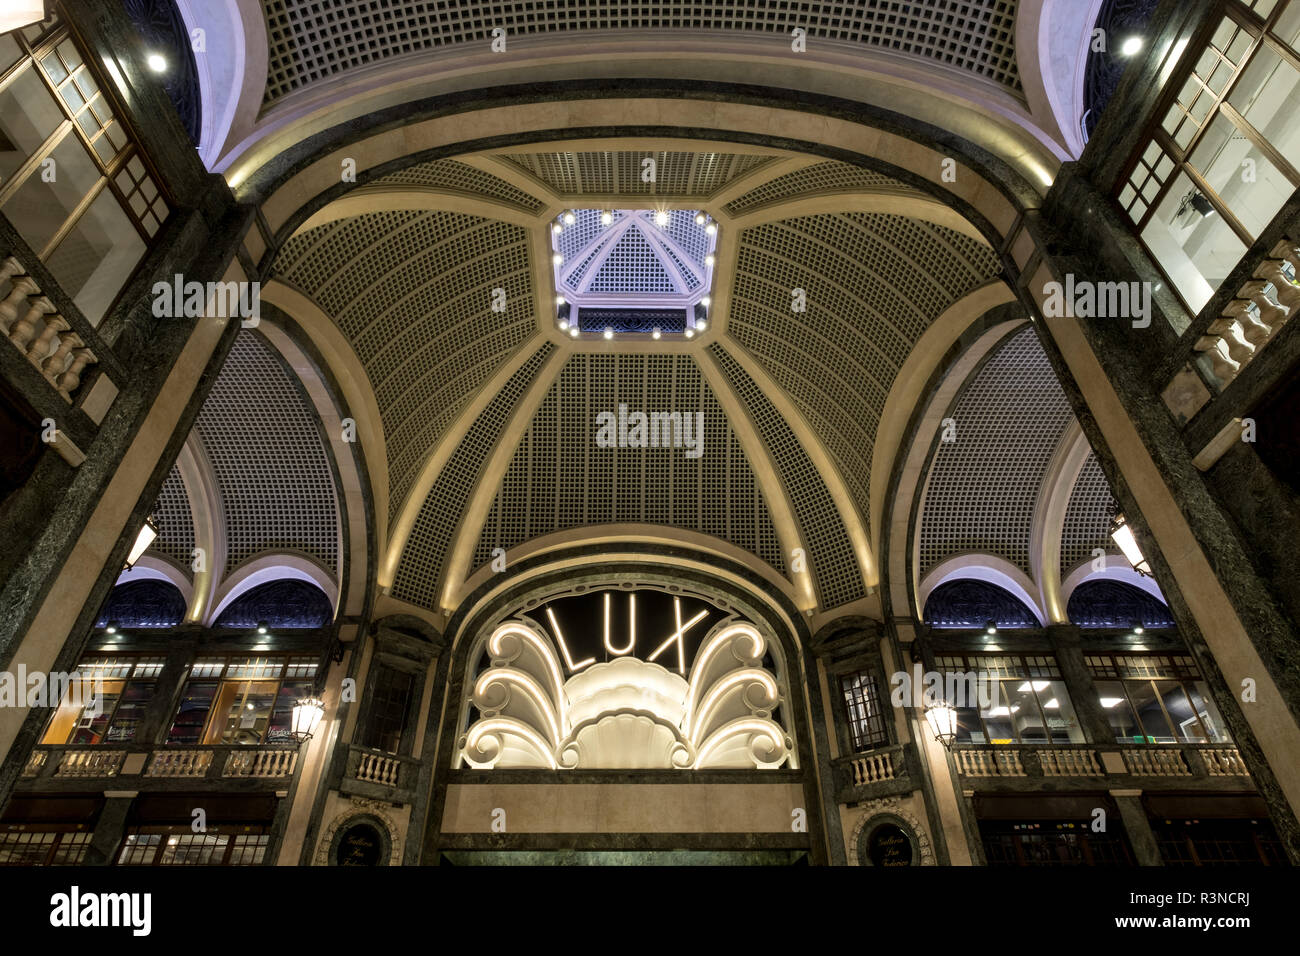 Turin Italy. Lux Cinema in art deco style, high-end shopping mall, Galleria San Federico. Stock Photo